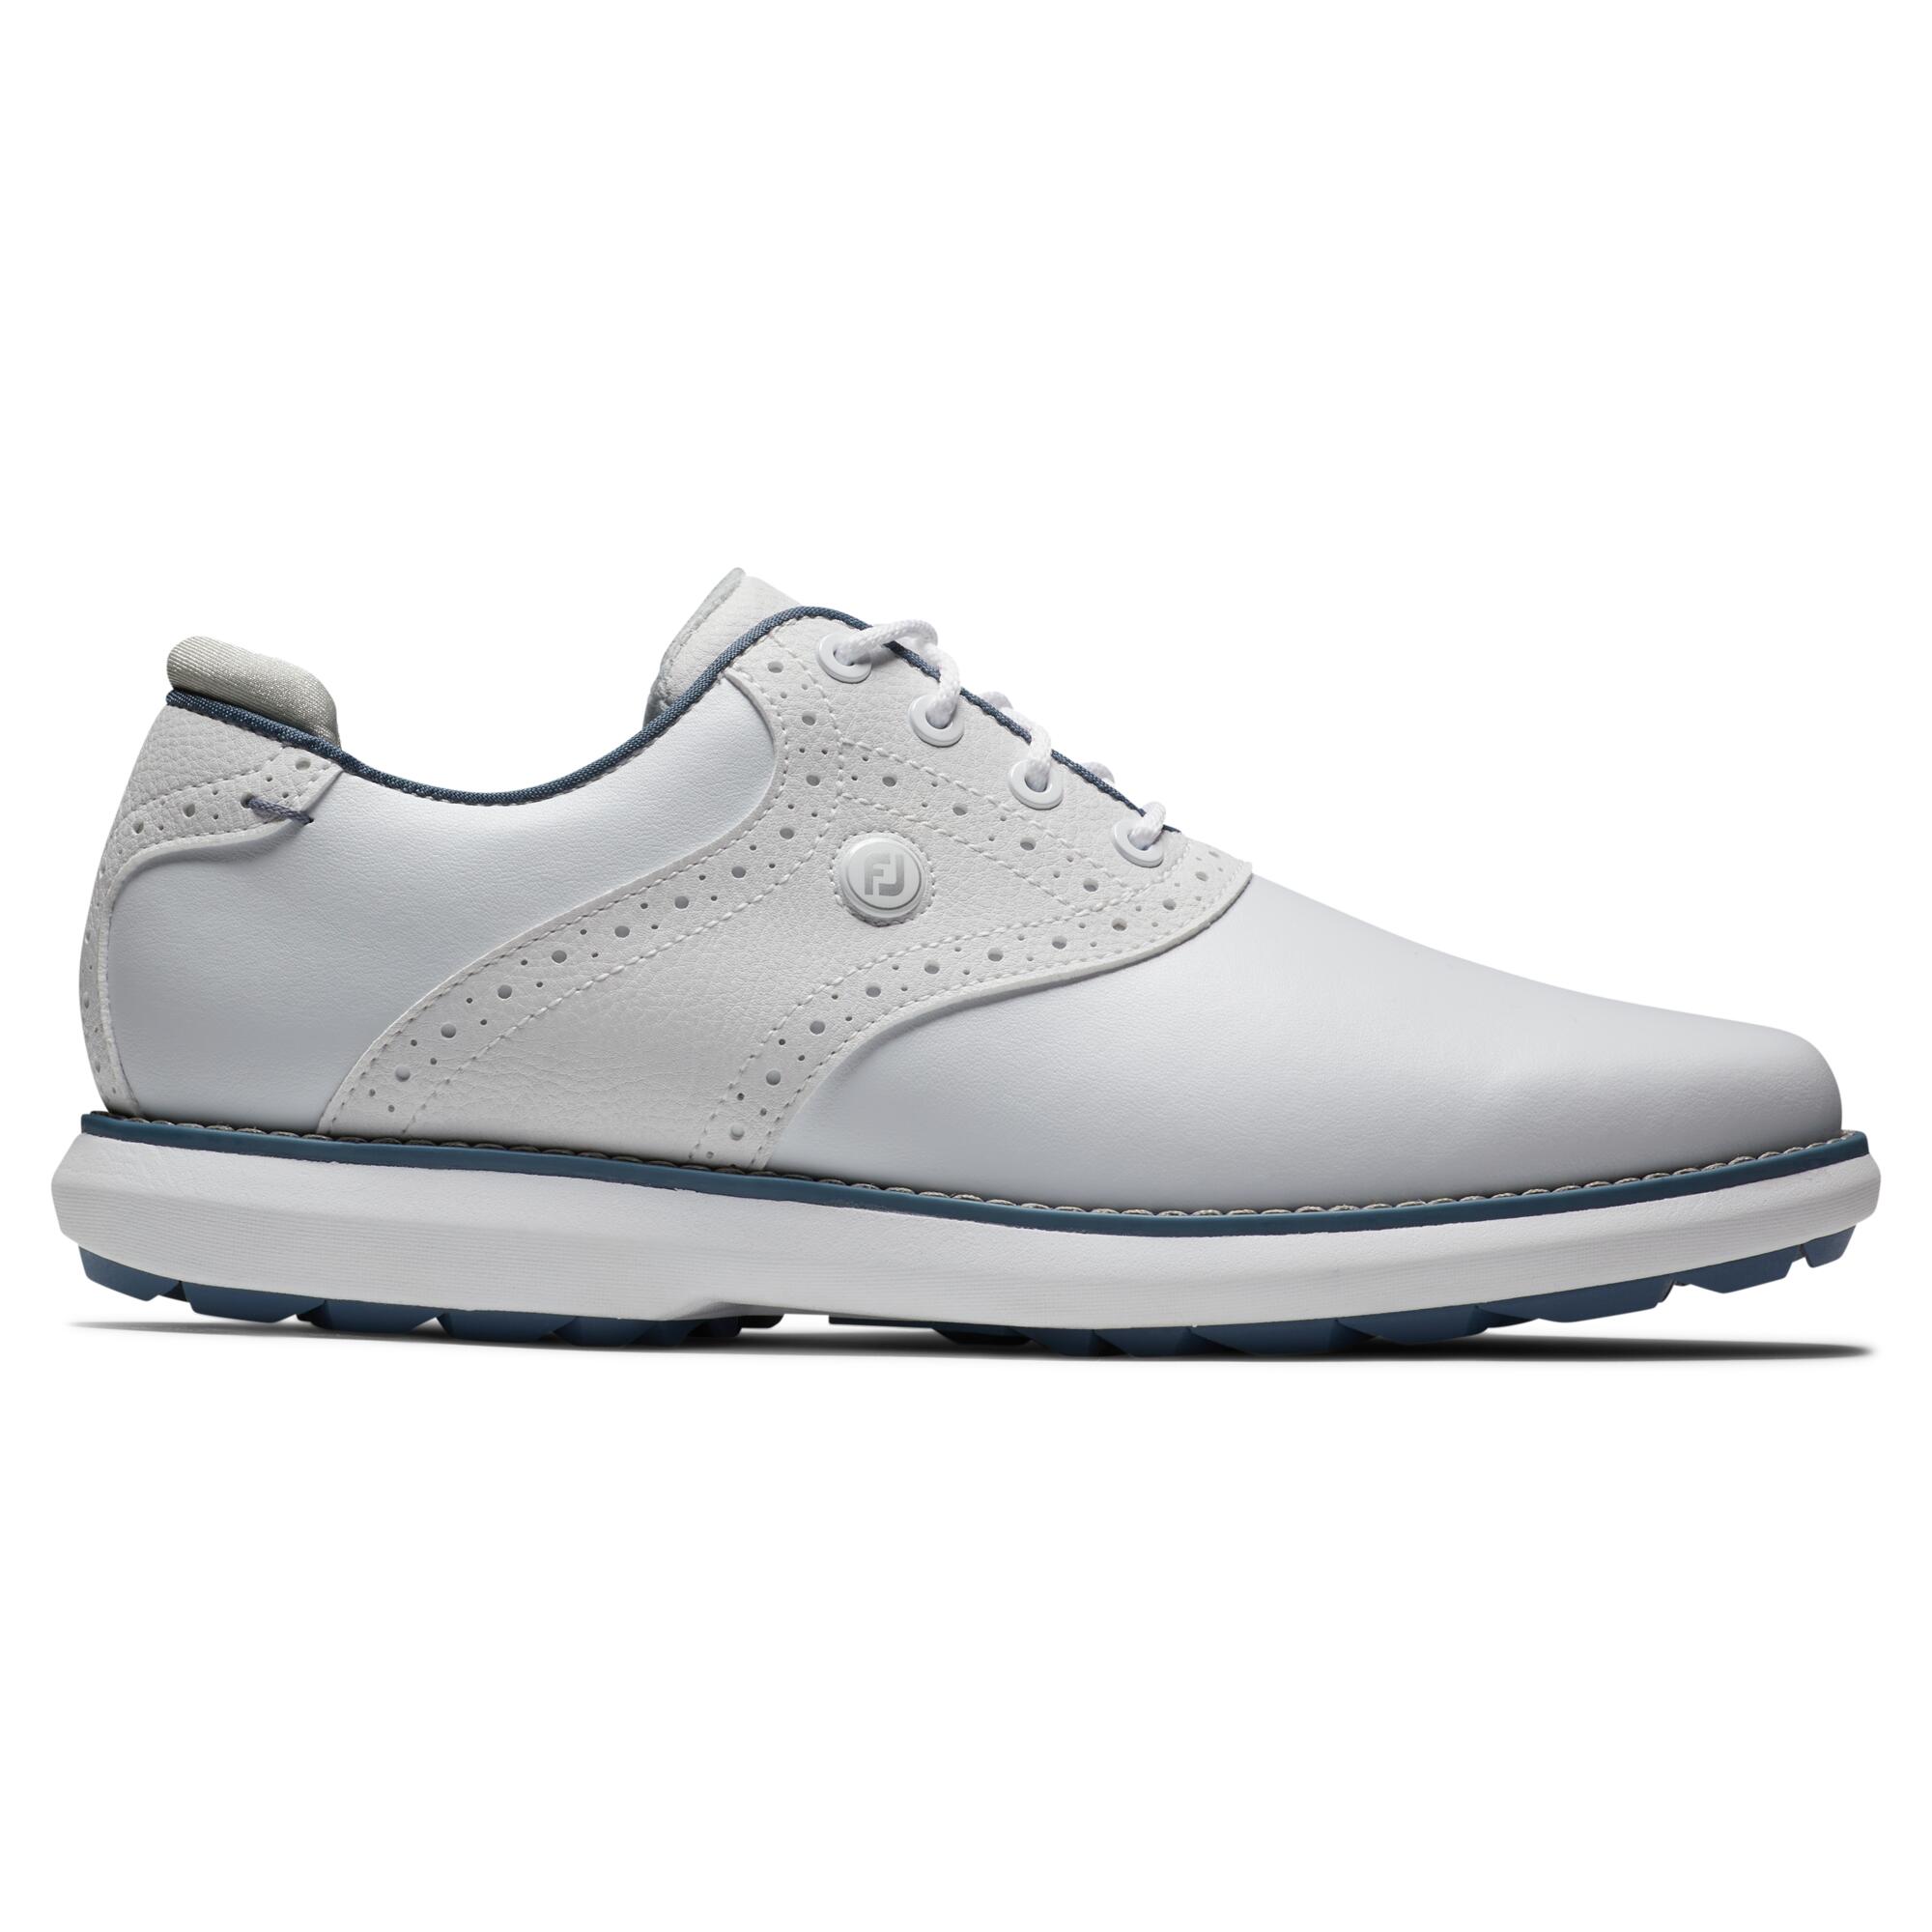 Women's golf shoes spikeless - Tradition white 1/5